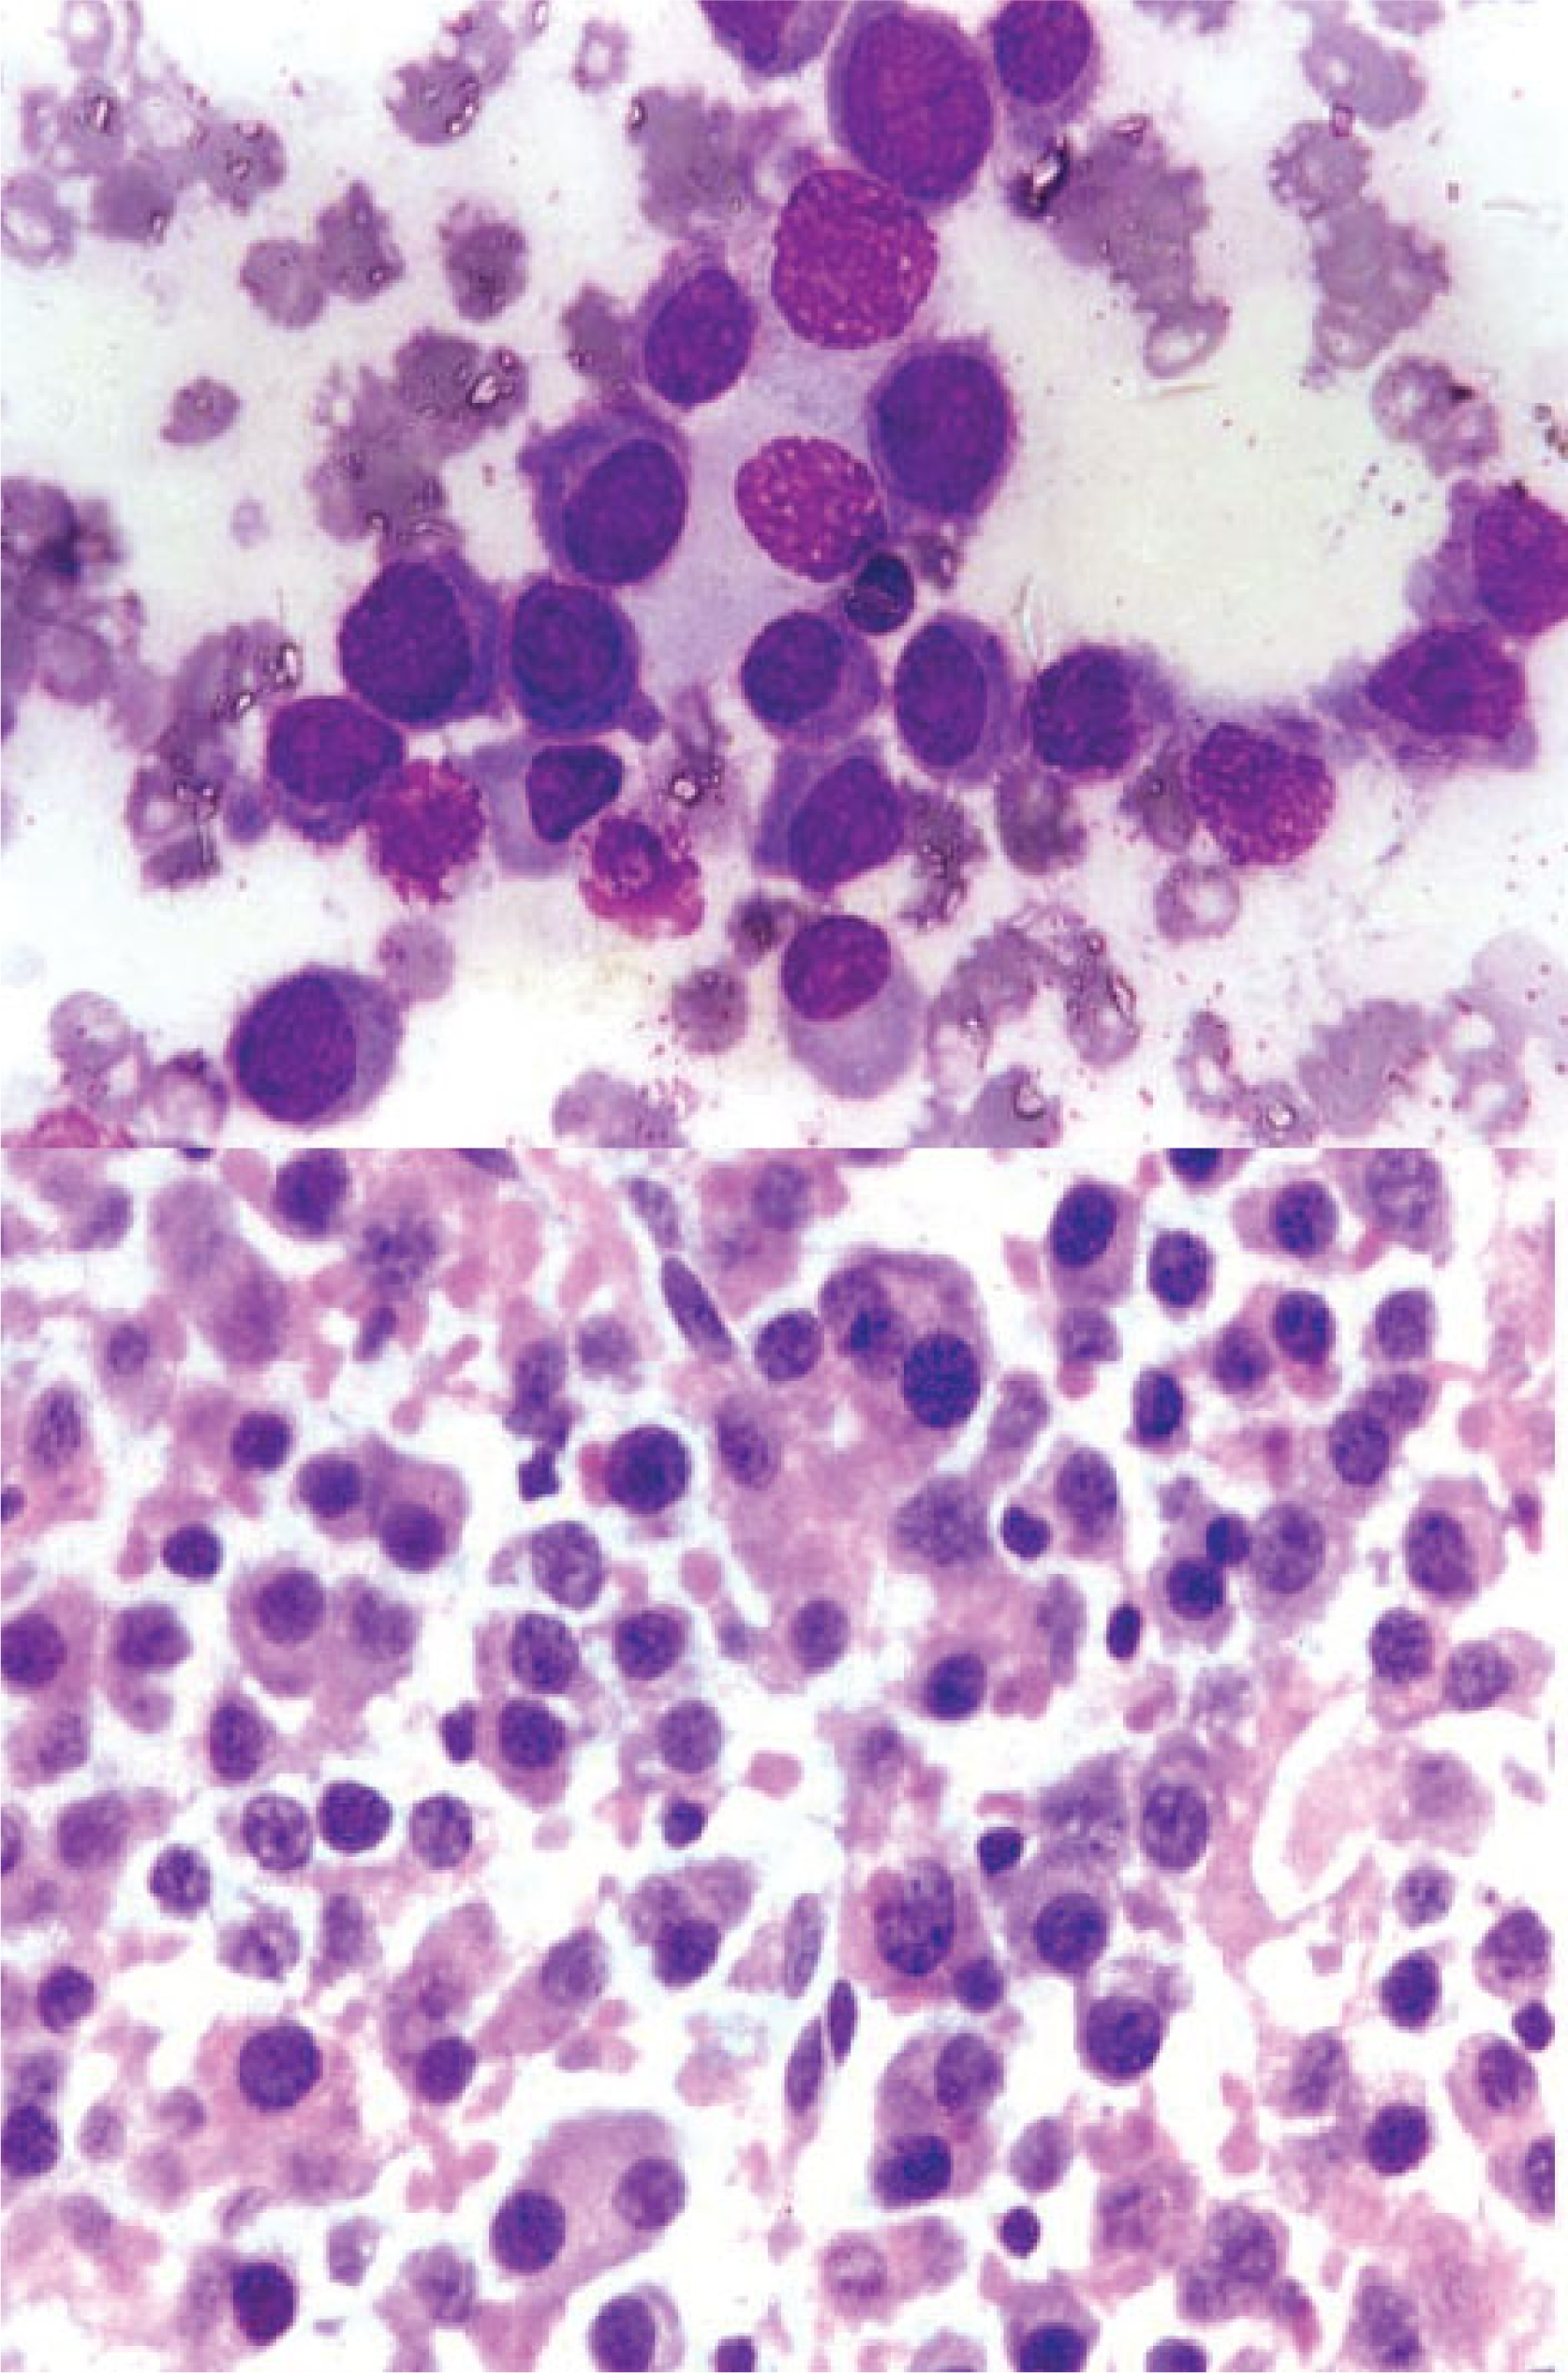 1. Smear showing myeloma cells. [MGG; × 400]. 2. Histopathology section showing dispersed tumor cells many having a “clock-face” condensation of chromatin. [H&E × 200].